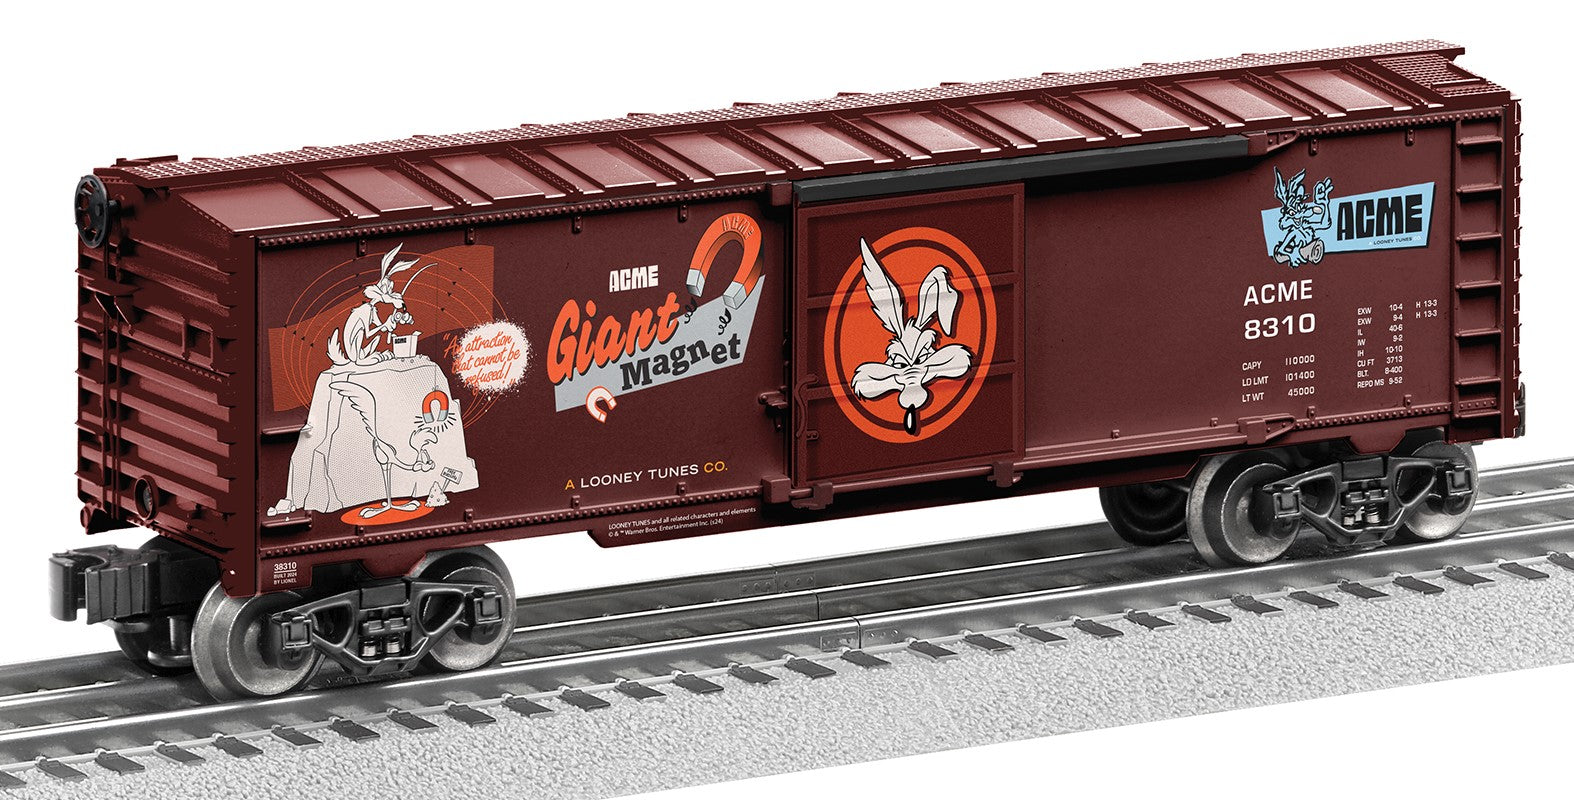 Lionel 2438310 - Looney Tunes - Boxcar "ACME" #8310 (Giant Magnet)